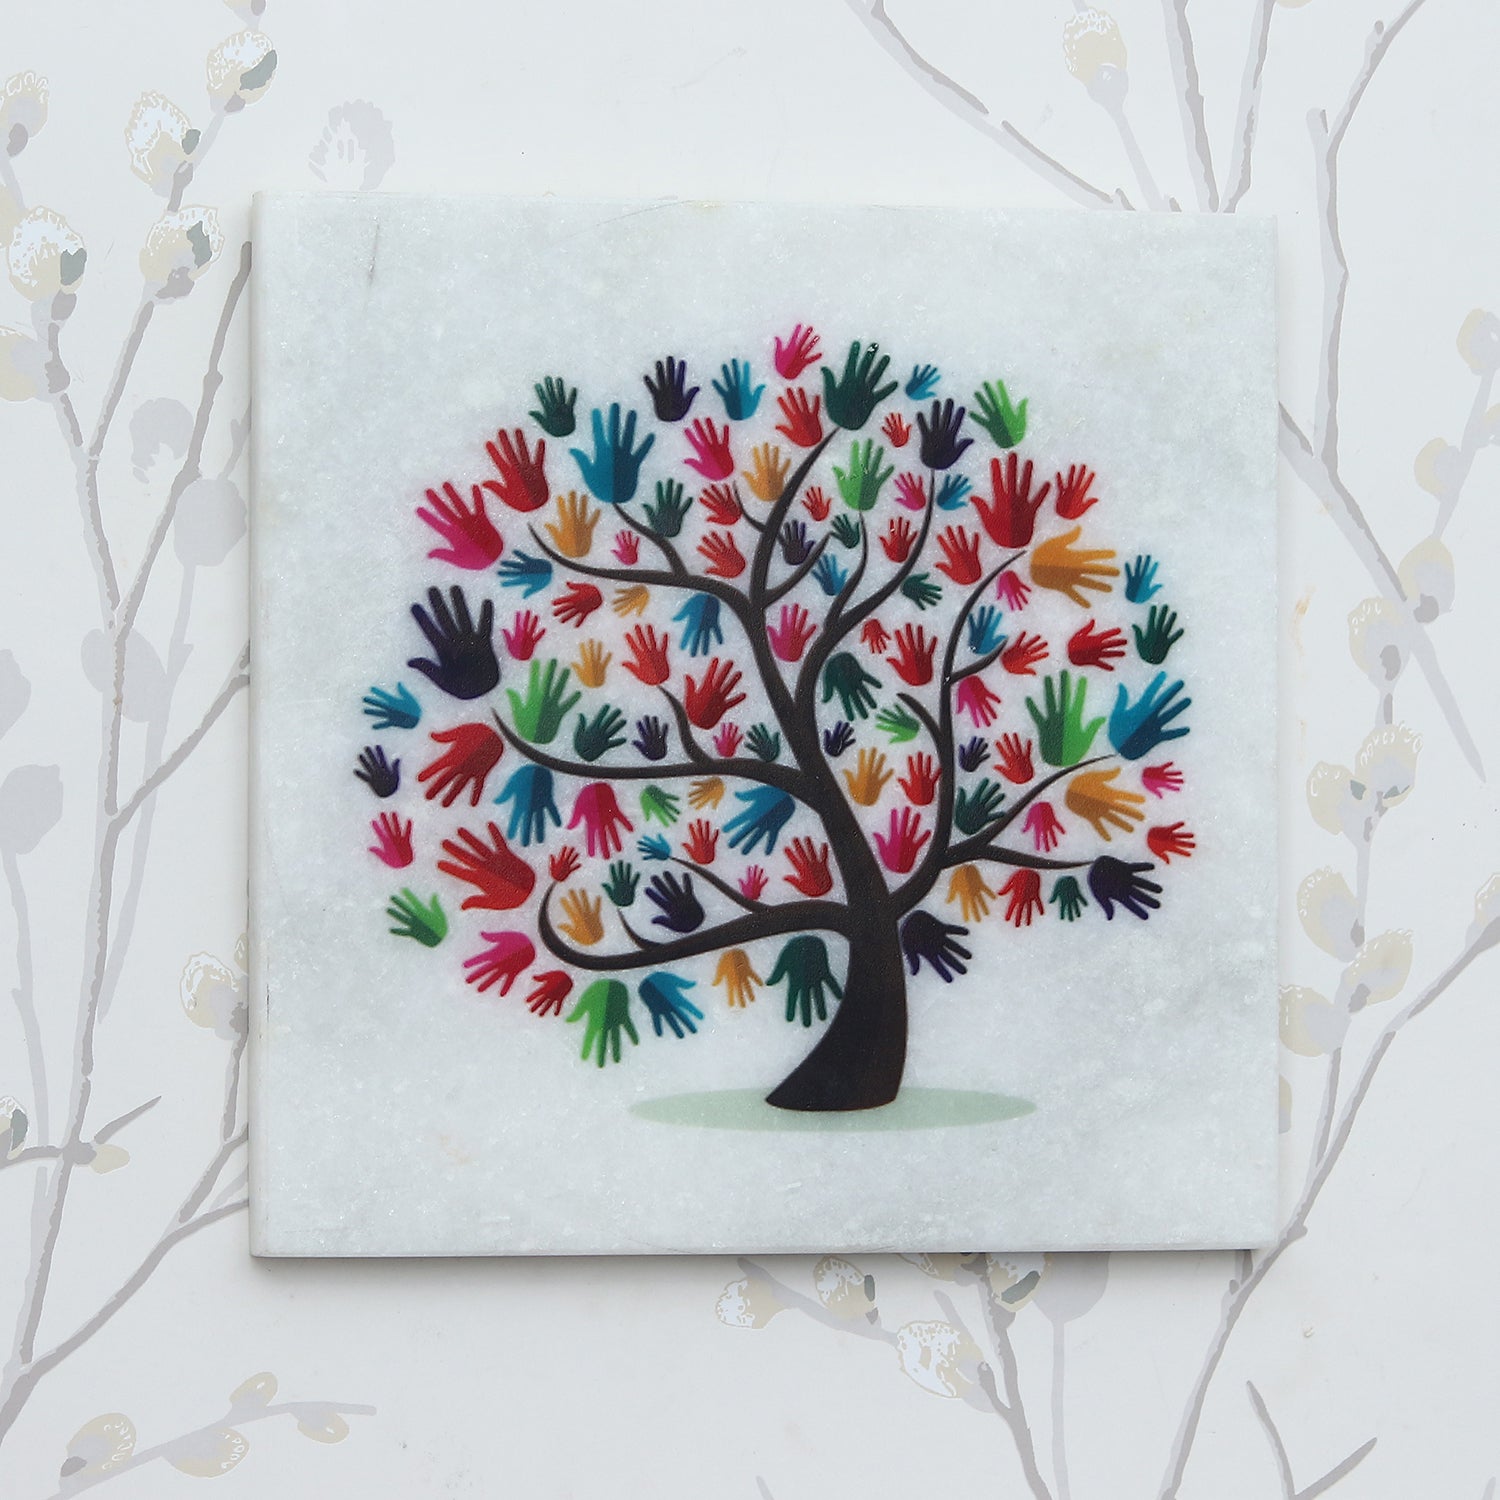 Colorful Hands Tree Painting On Marble Square Tile 6